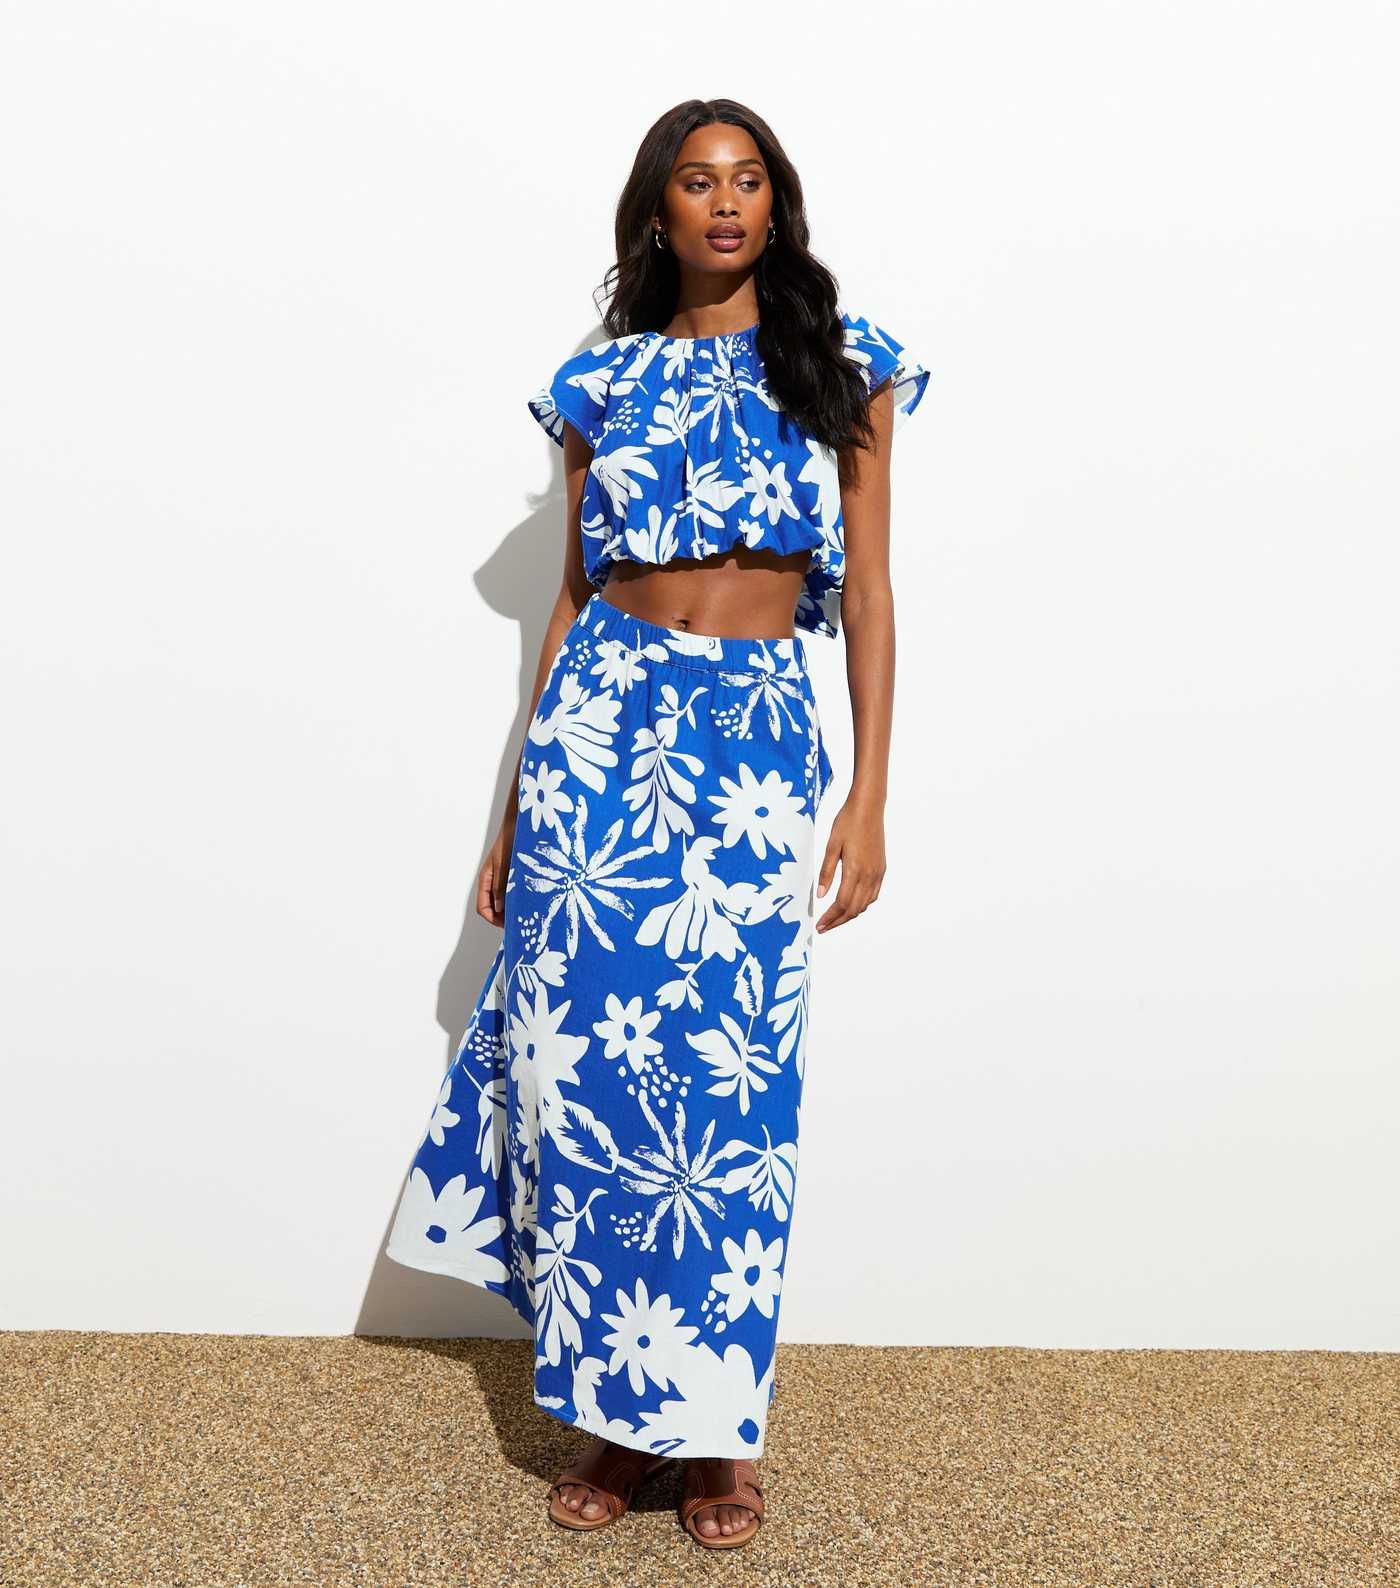 Blue Floral Print Midi Skirt
						
						Add to Saved Items
						Remove from Saved Items | New Look (UK)